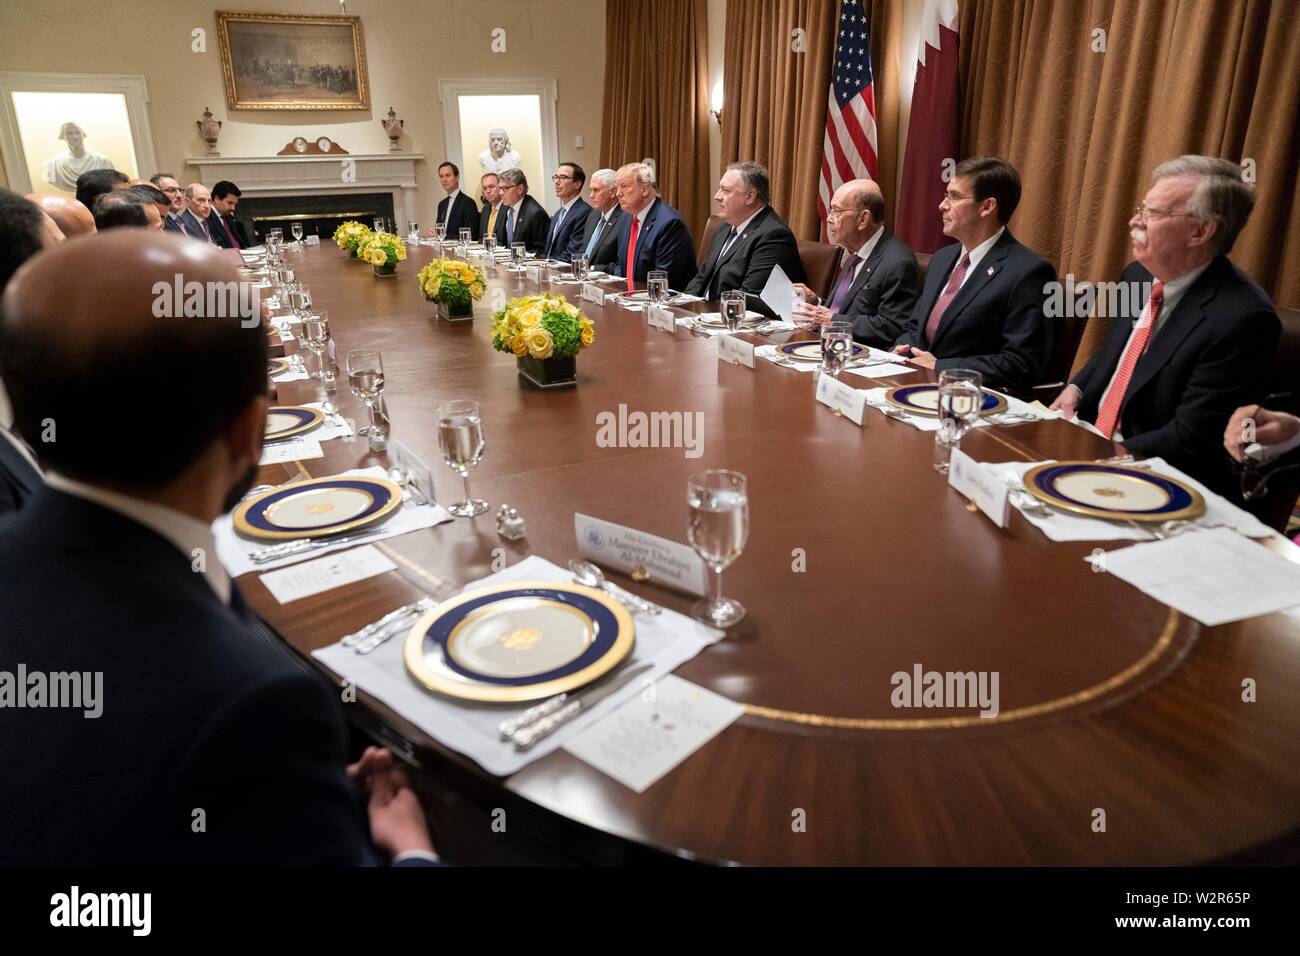 U.S President Donald Trump, joined by Vice President Mike Pence and Cabinet members, participate in an expanded working luncheon with the Emir of Qatar, Tamin bin Hamad Al Thani and delegates at the Cabinet Room of the White House July 9, 2019 in Washington, DC. Stock Photo